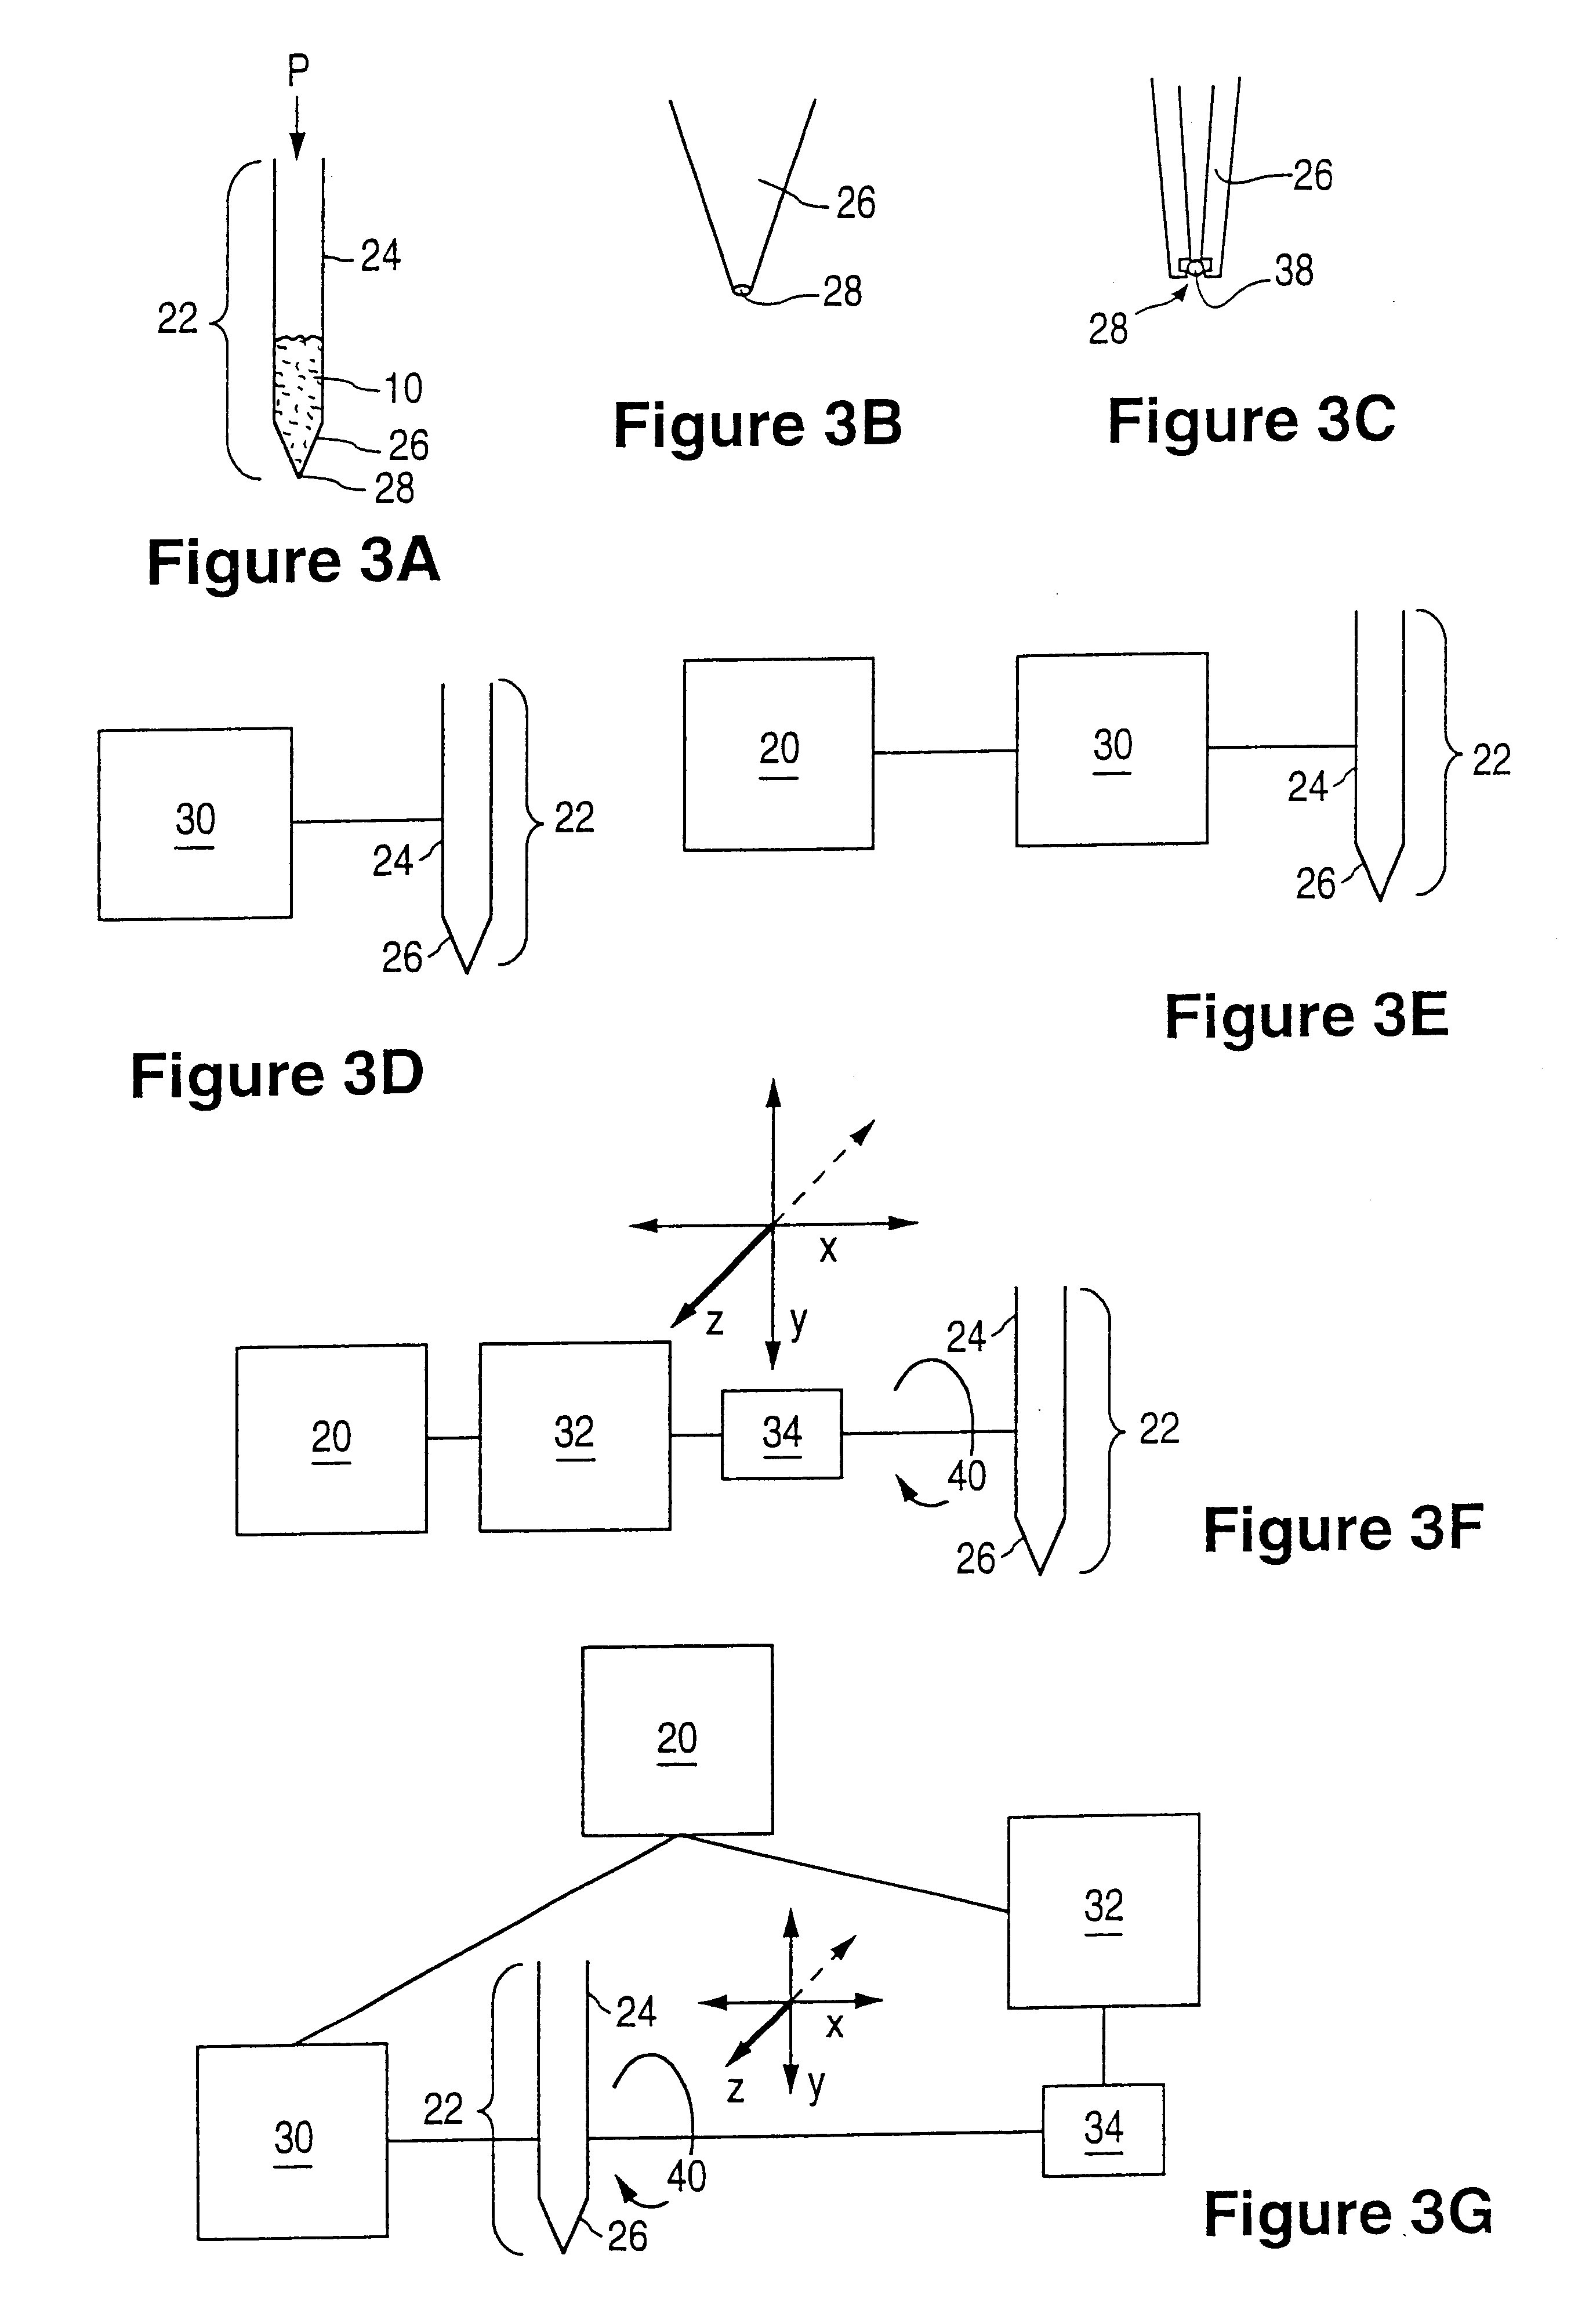 Apparatus and method for depositing a coating onto a surface of a prosthesis